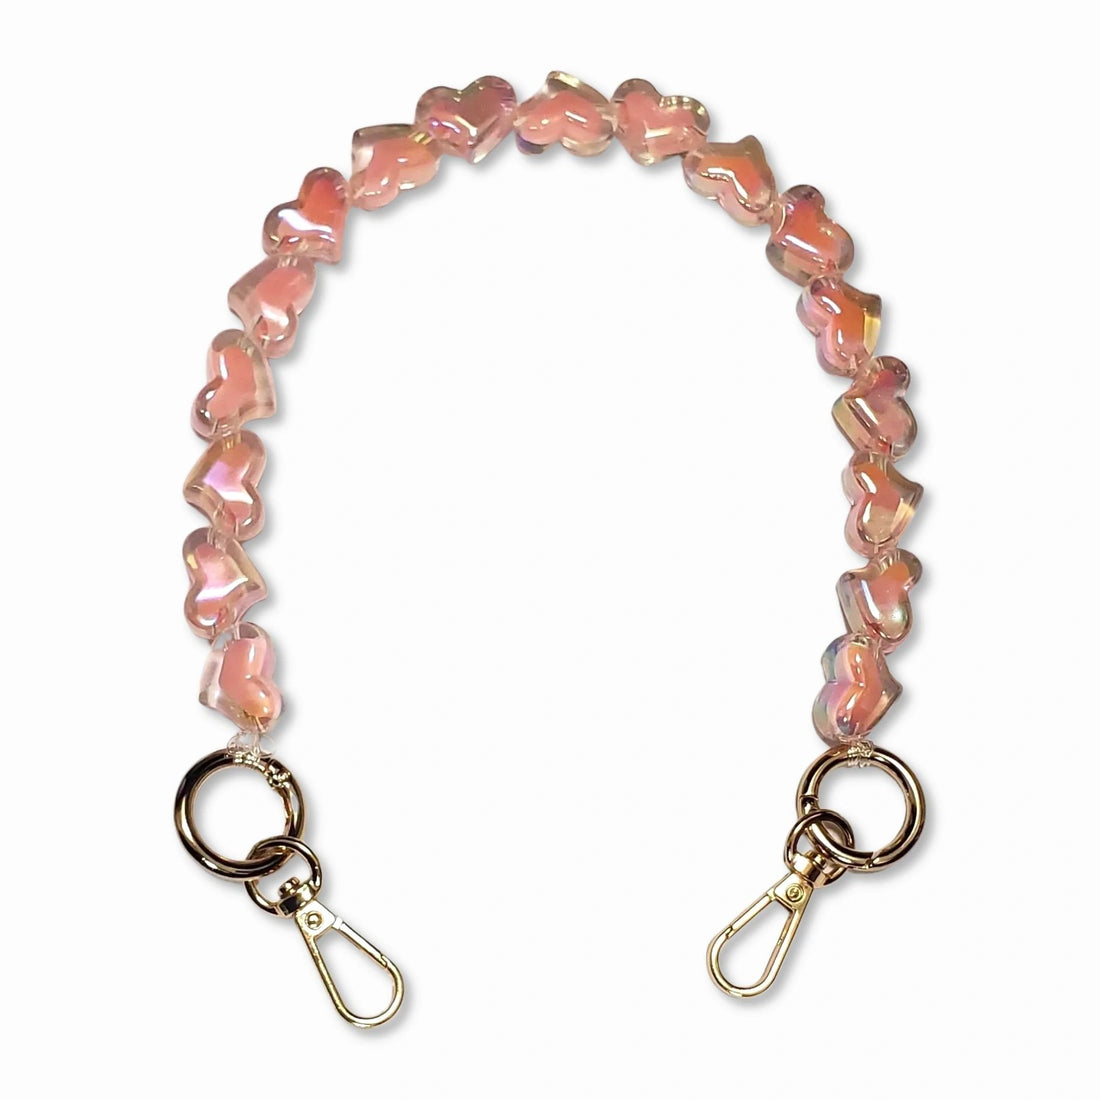 A short bead chain with golden carabiners and a glittery heart charm in light pink color. The chain is designed to be attached to a phone case and can be worn around the wrist for a playful and eye-catching look. The chain is made by The American Case and is designed to be durable.